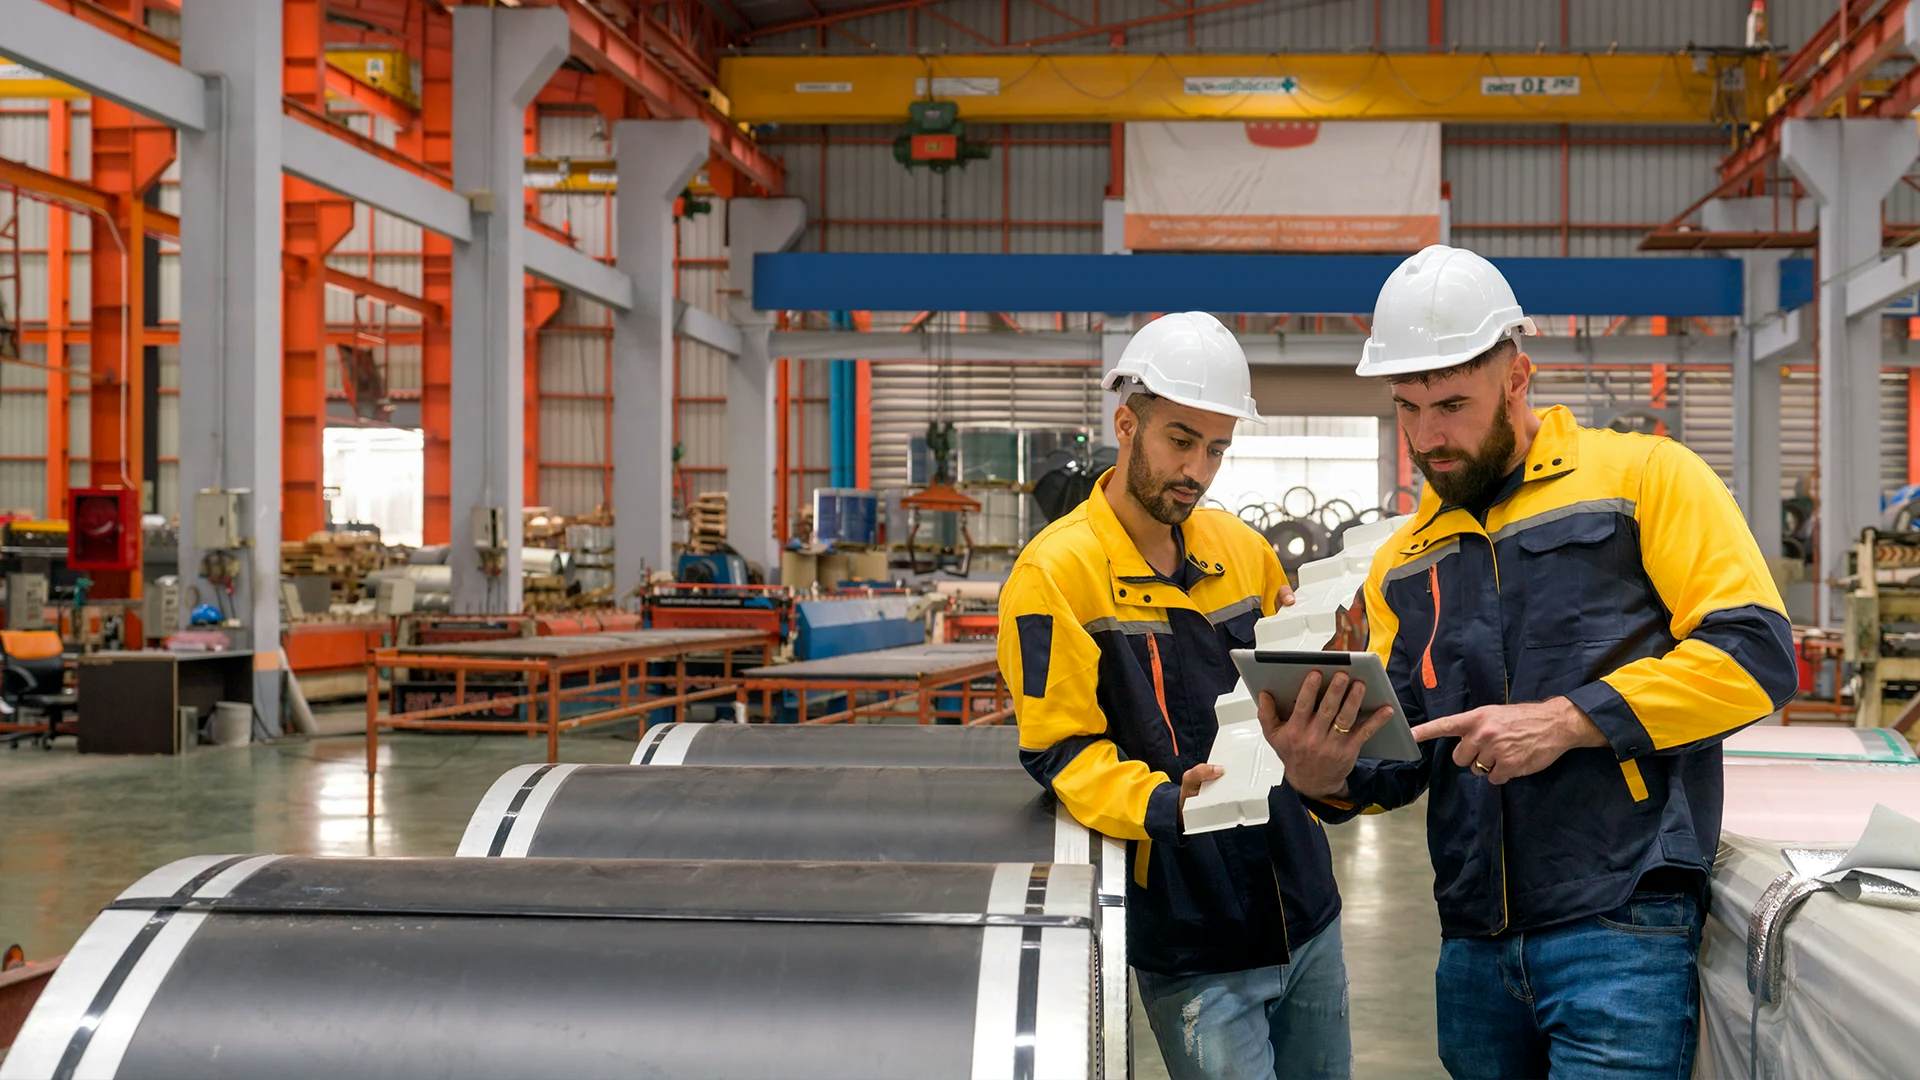 Two engineers in yellow and blue safety gear using a tablet in a manufacturing plant with large pipes in the foreground and factory equipment in the background.